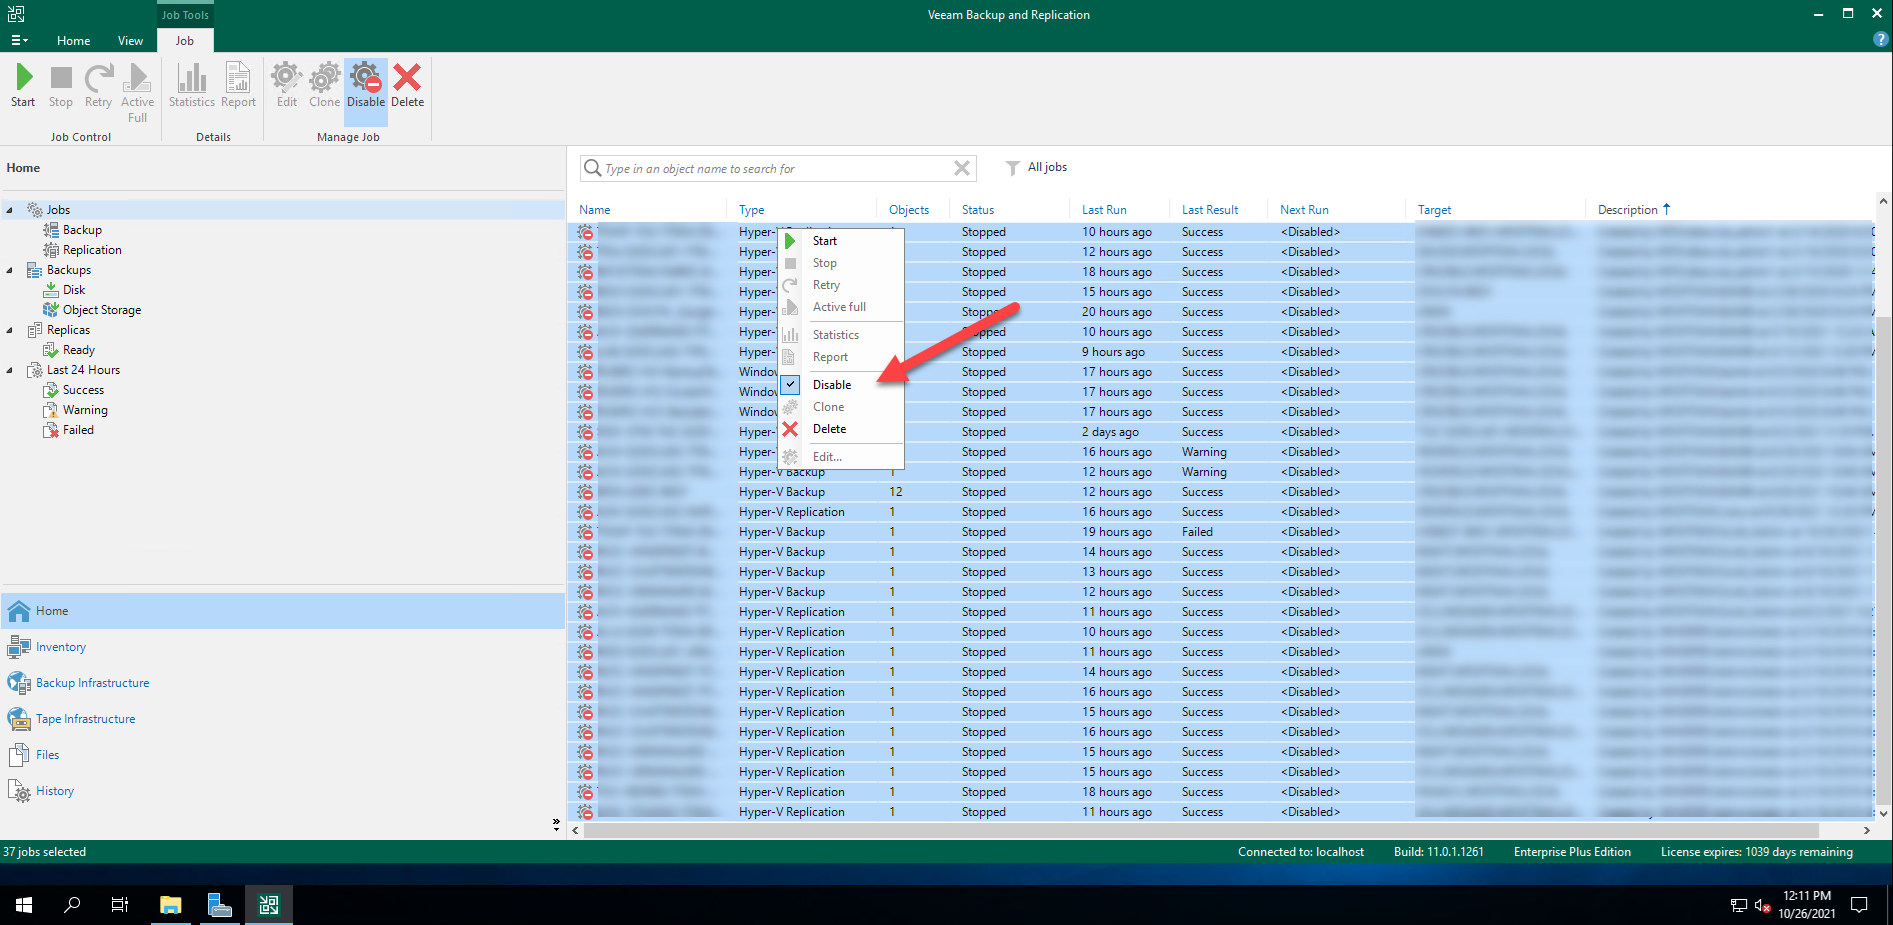 121321 0613 HowtoUpgrad28 - How to Upgrade Veeam Backup and Replication to v11a